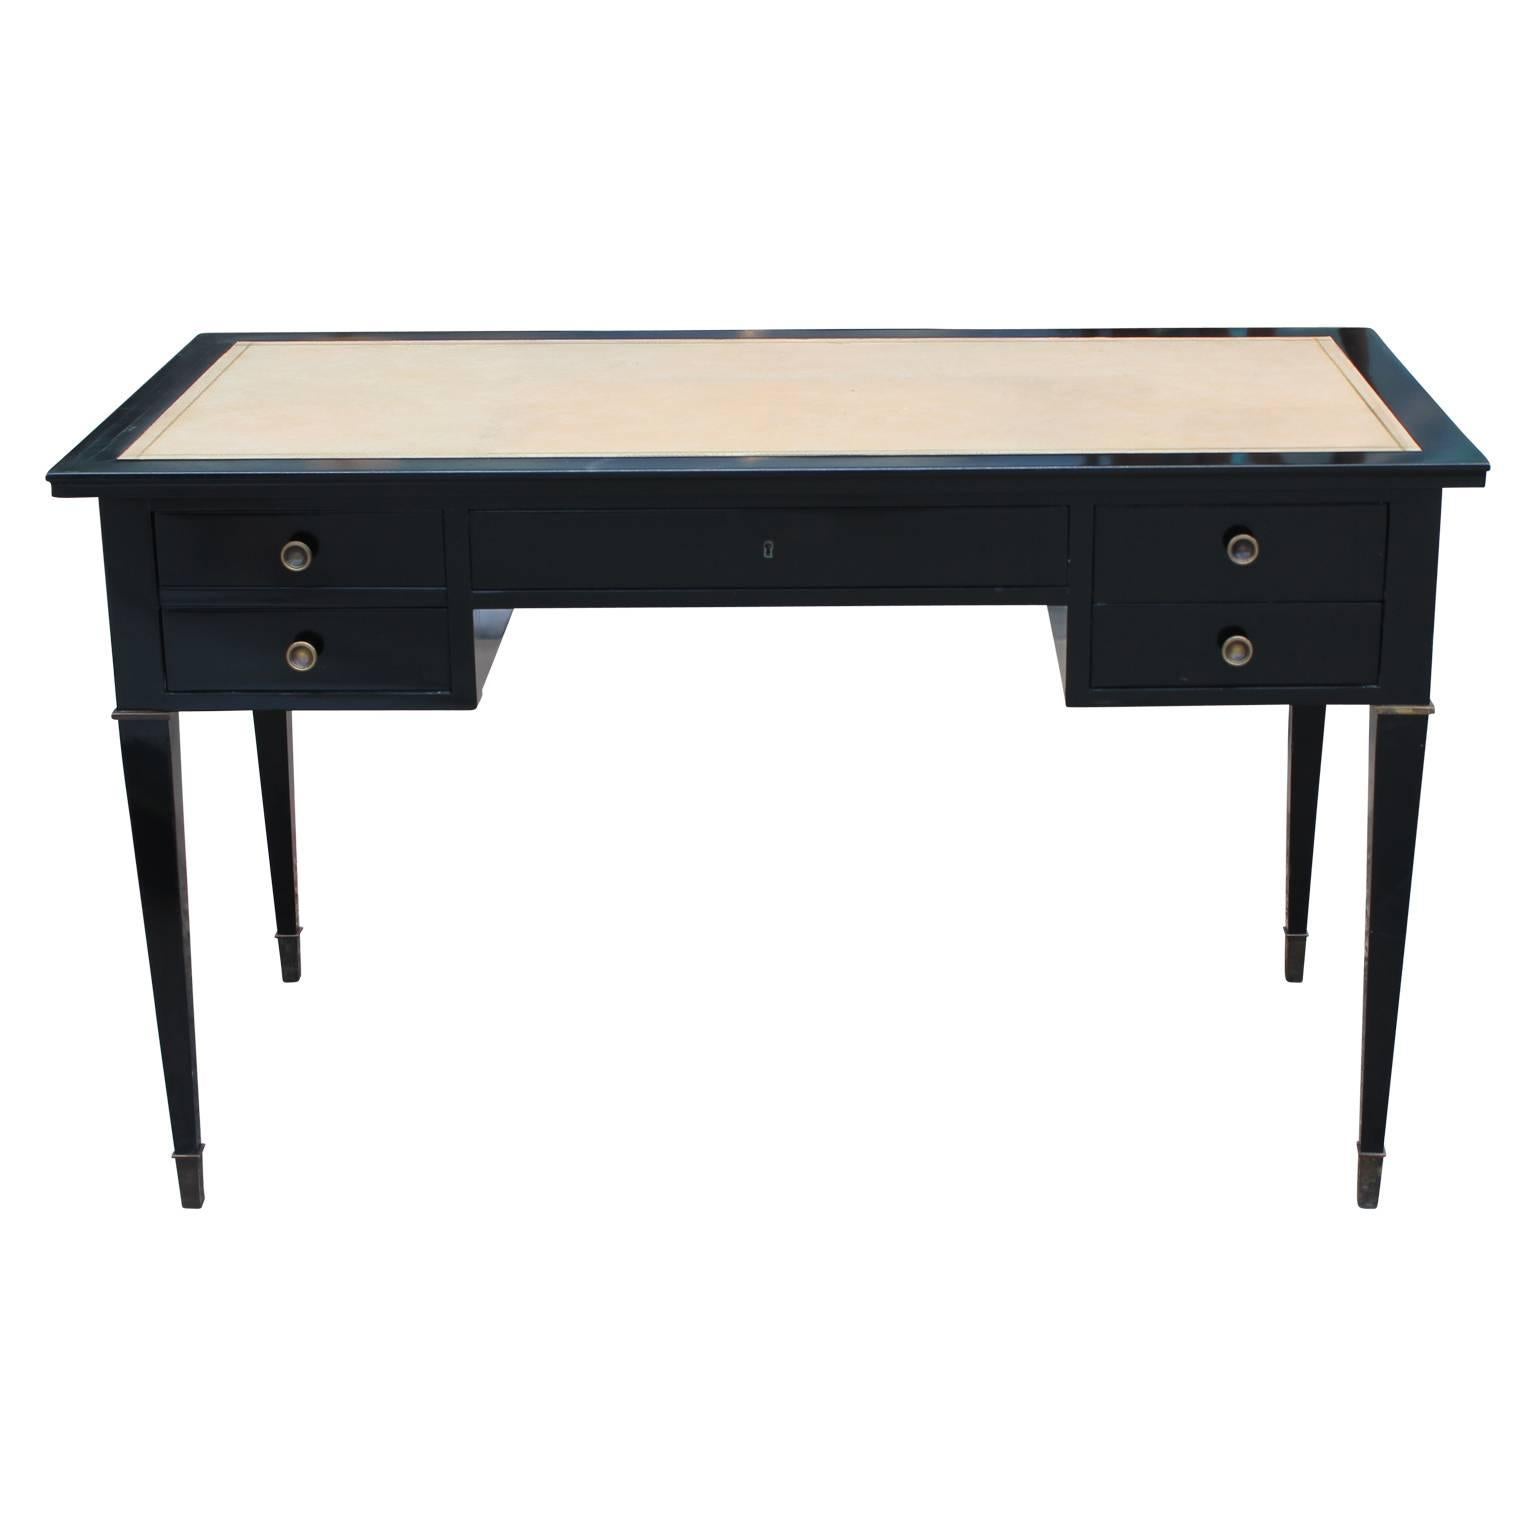 Argentine Maison Jansen Style Desk with Leather Top